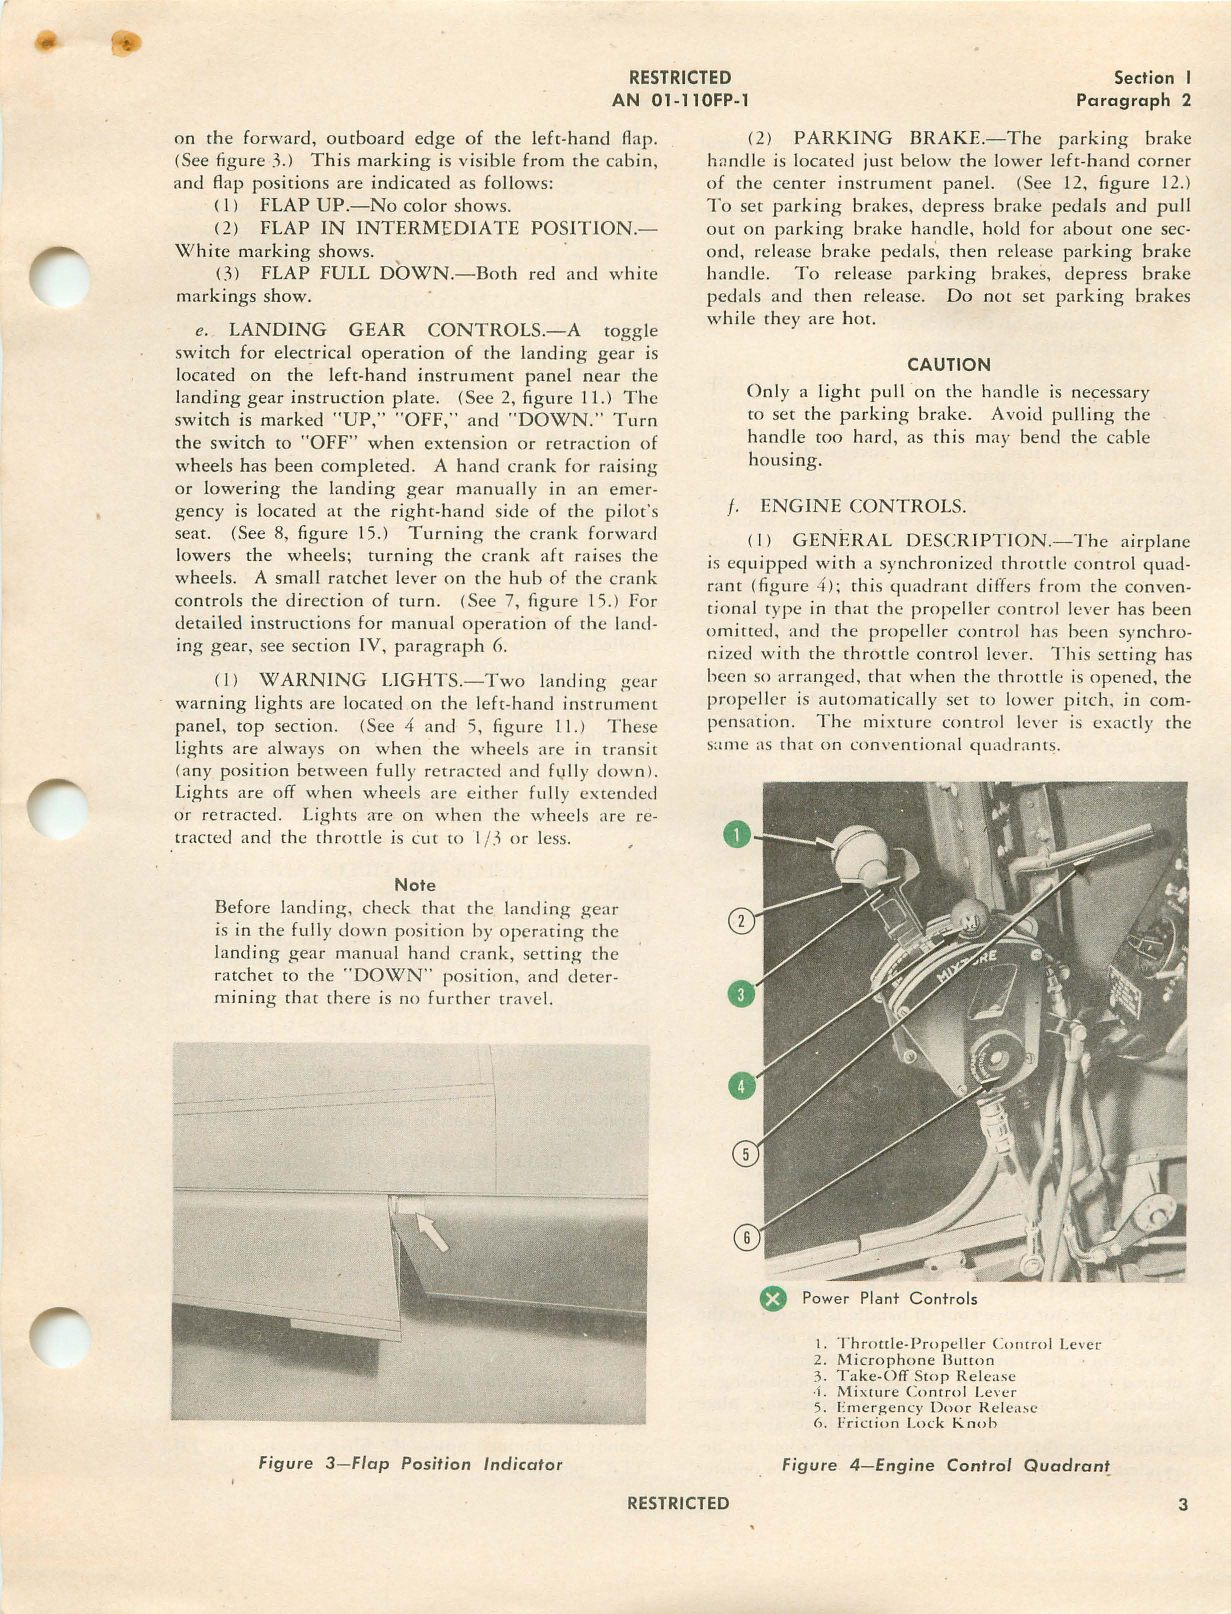 Sample page 7 from AirCorps Library document: Pilot's Flight Operating Instructions for P-63A-1, P-63A-5, P-63A-6, P-63A-7, P-63A-8, P-63A-9, P-63A-10